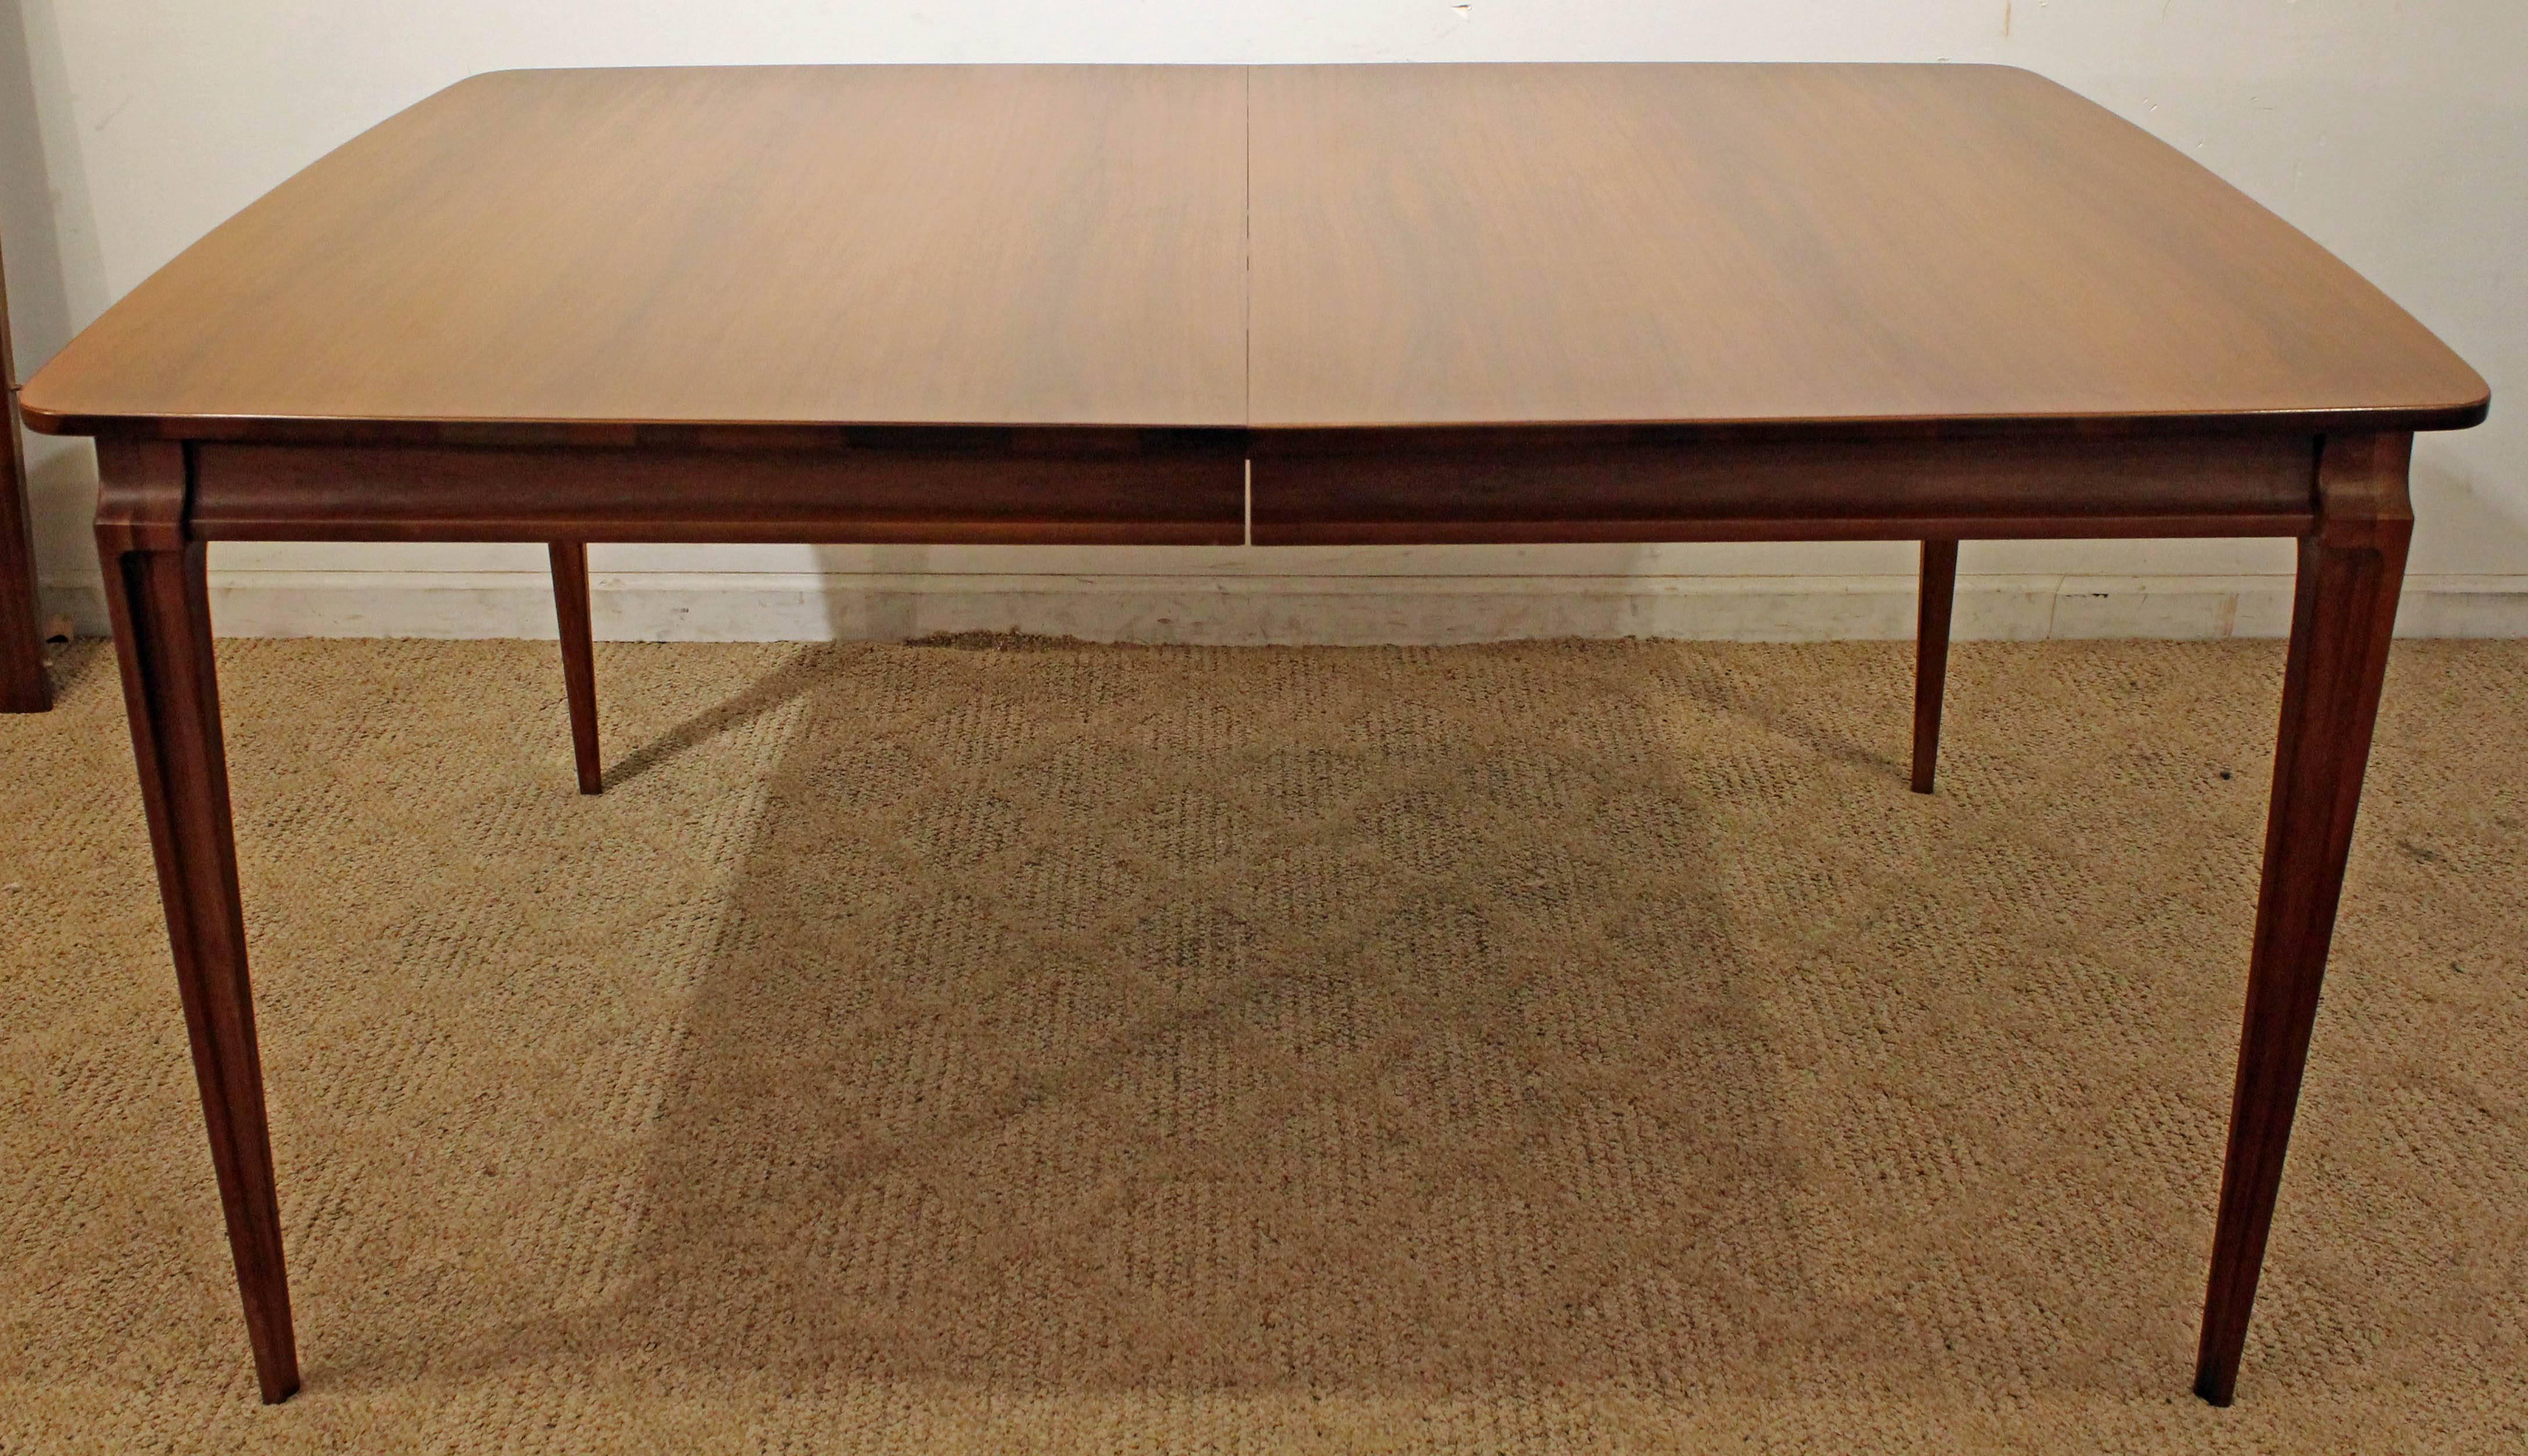 Offered is a Mid-Century Modern dining table. It is made of walnut and includes two extension boards. It is in good condition for its age, shows some age wear (sun fade, surface scratches, age wear-see pictures). It is not branded. A great set to